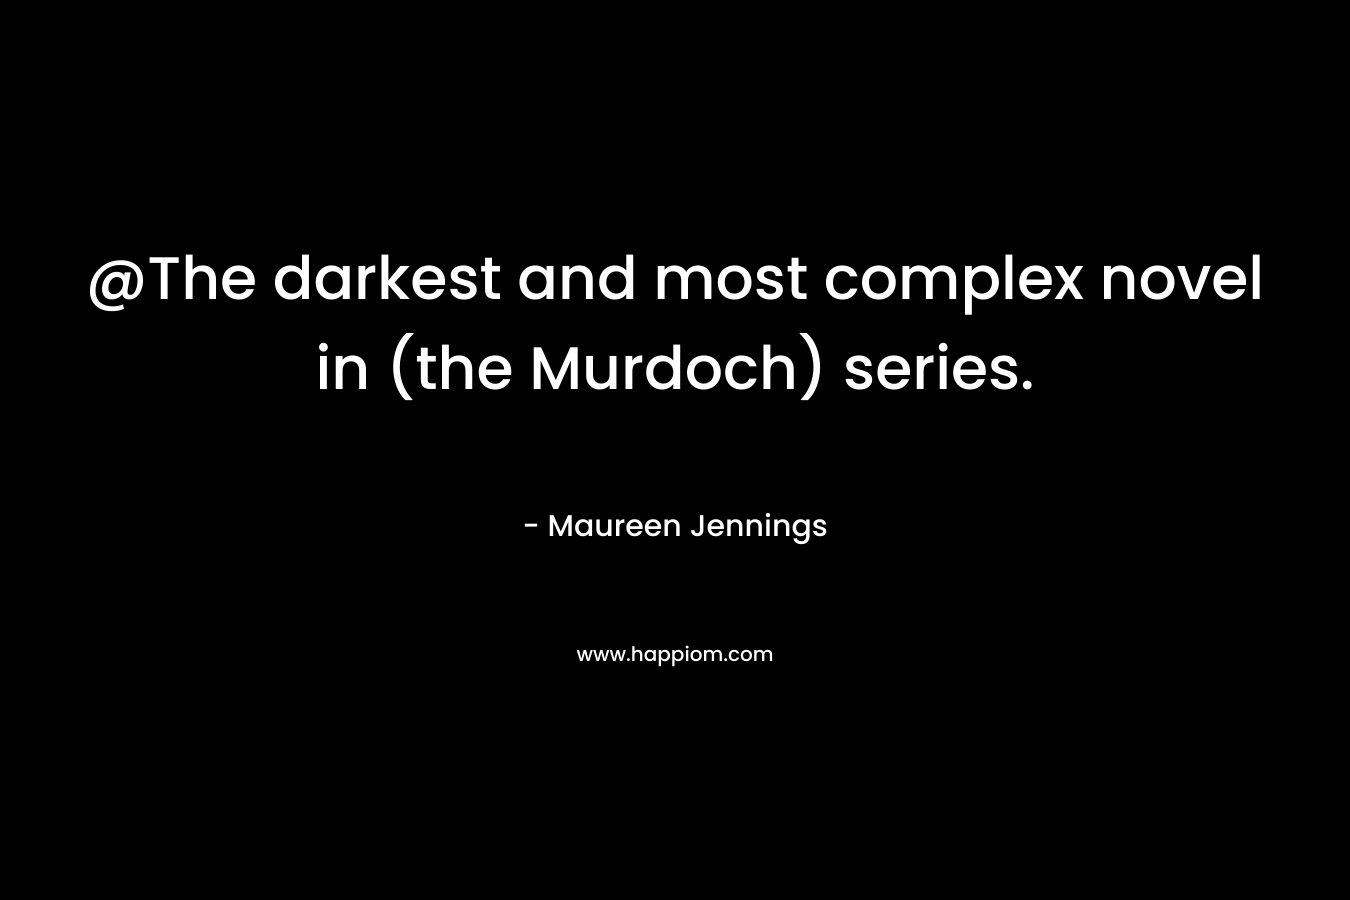 @The darkest and most complex novel in (the Murdoch) series.